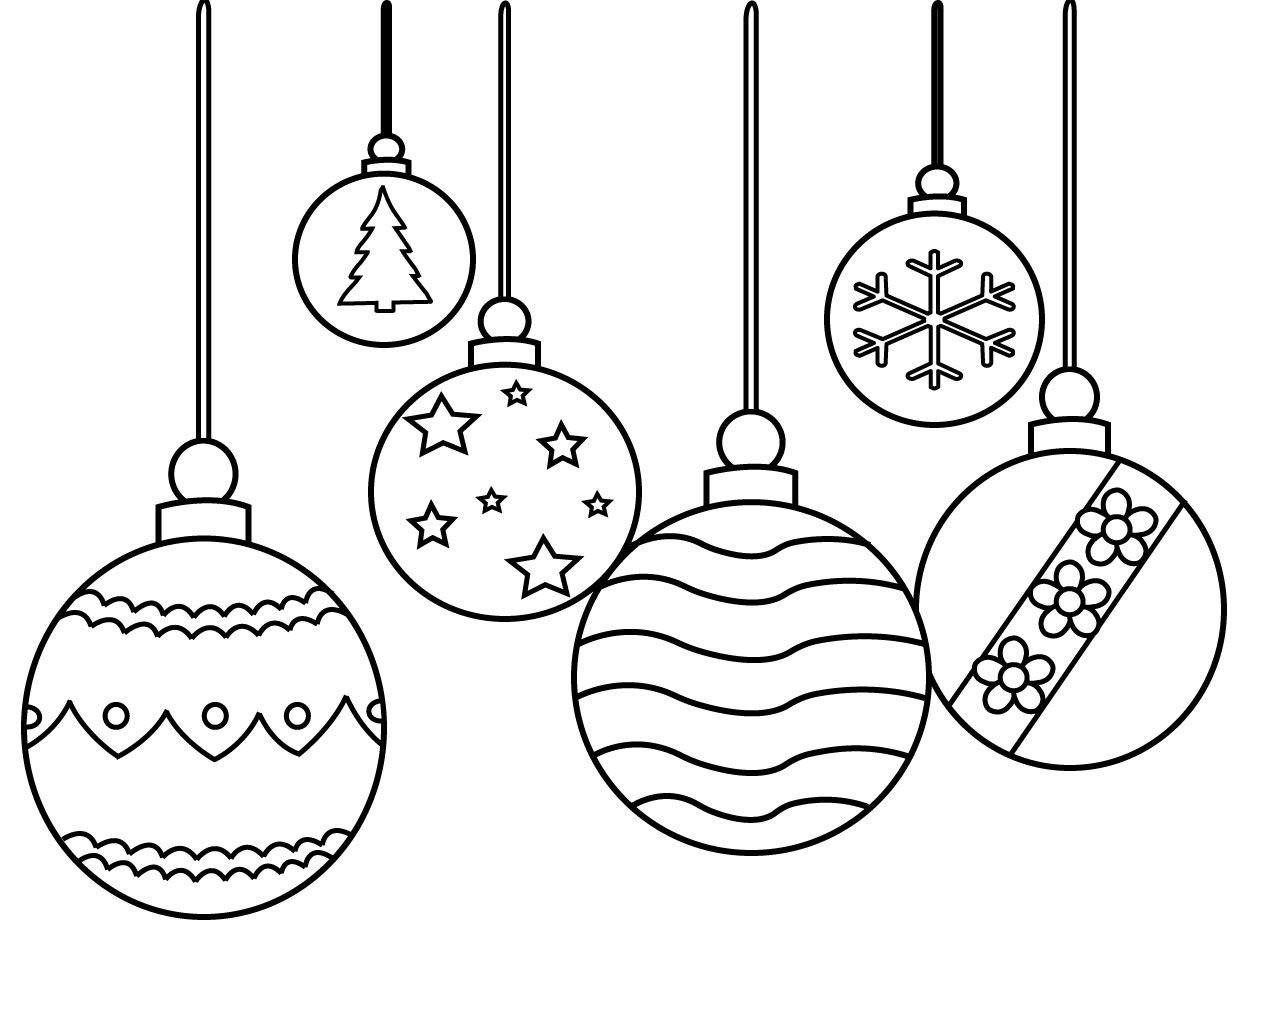 Printable Christmas Ornament Coloring Pages_31748